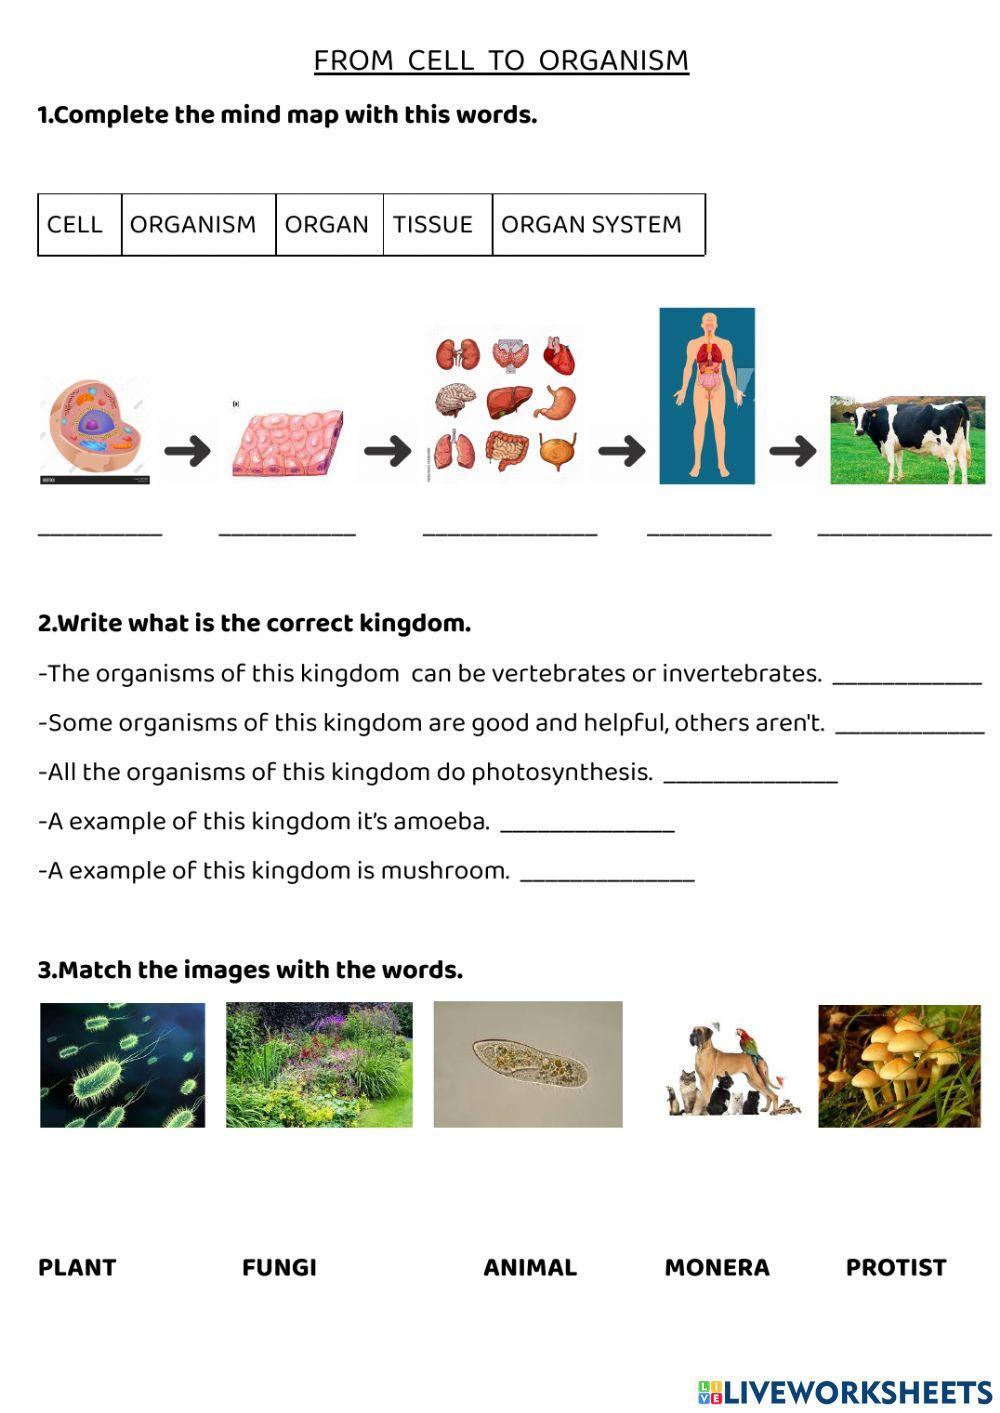 From cell to organism - 5 kingdoms of living things